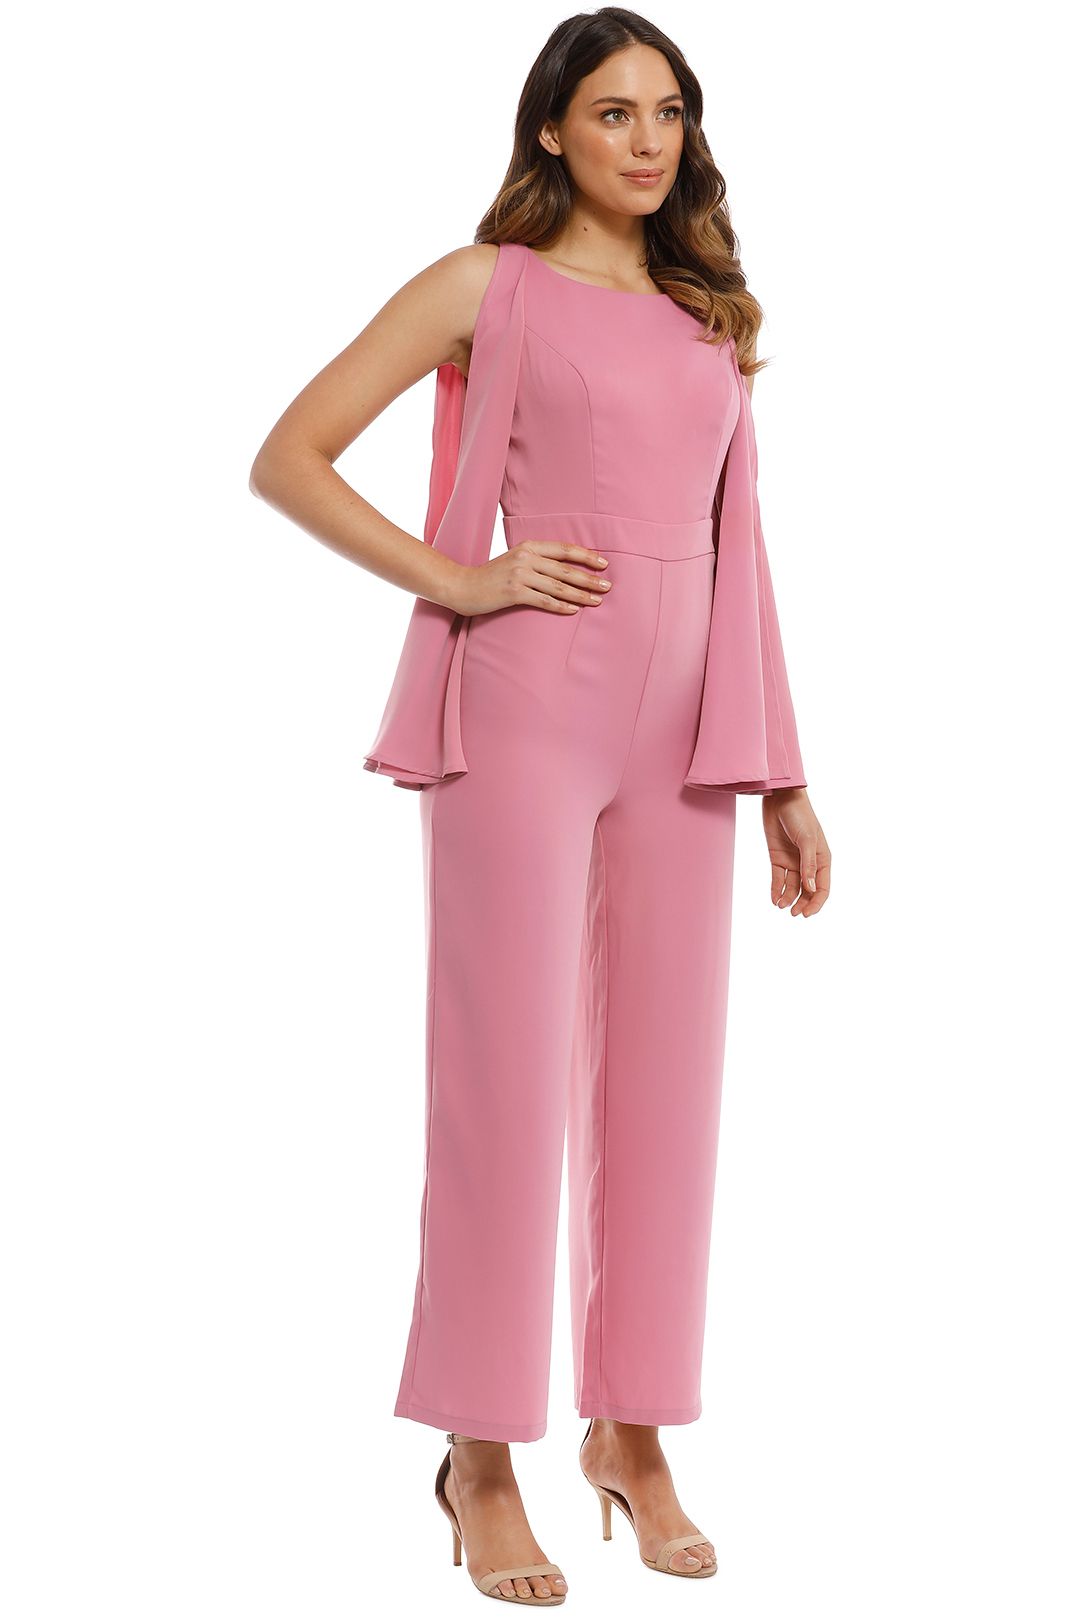 Go With The Flow Jumpsuit by Mossman for Hire